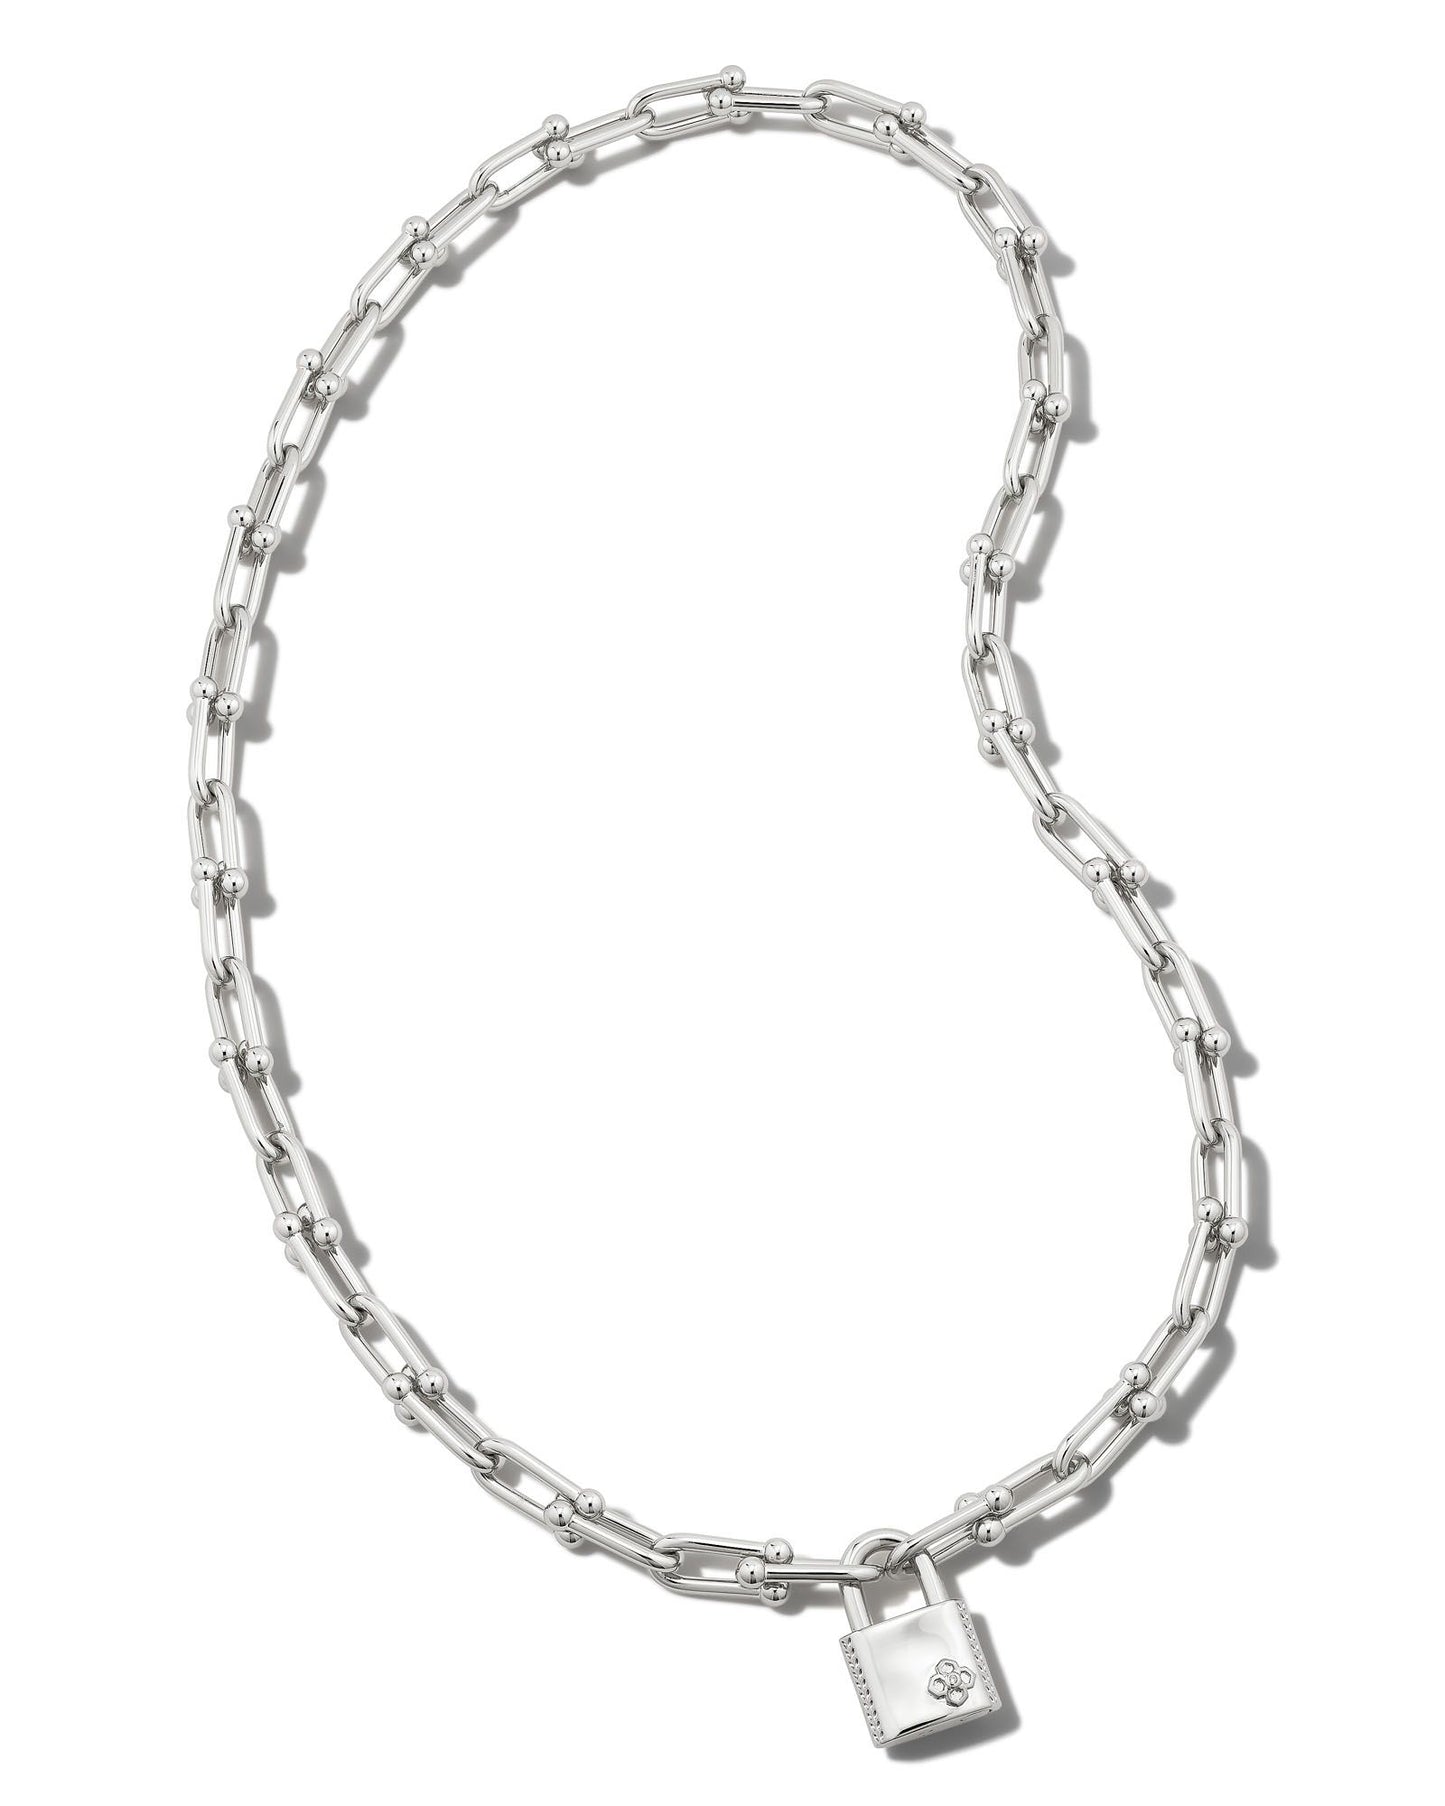 Kendra Scott Jess Lock and Chain Necklace Rhodium Metal-Necklaces-Kendra Scott-N1896RHD-The Twisted Chandelier